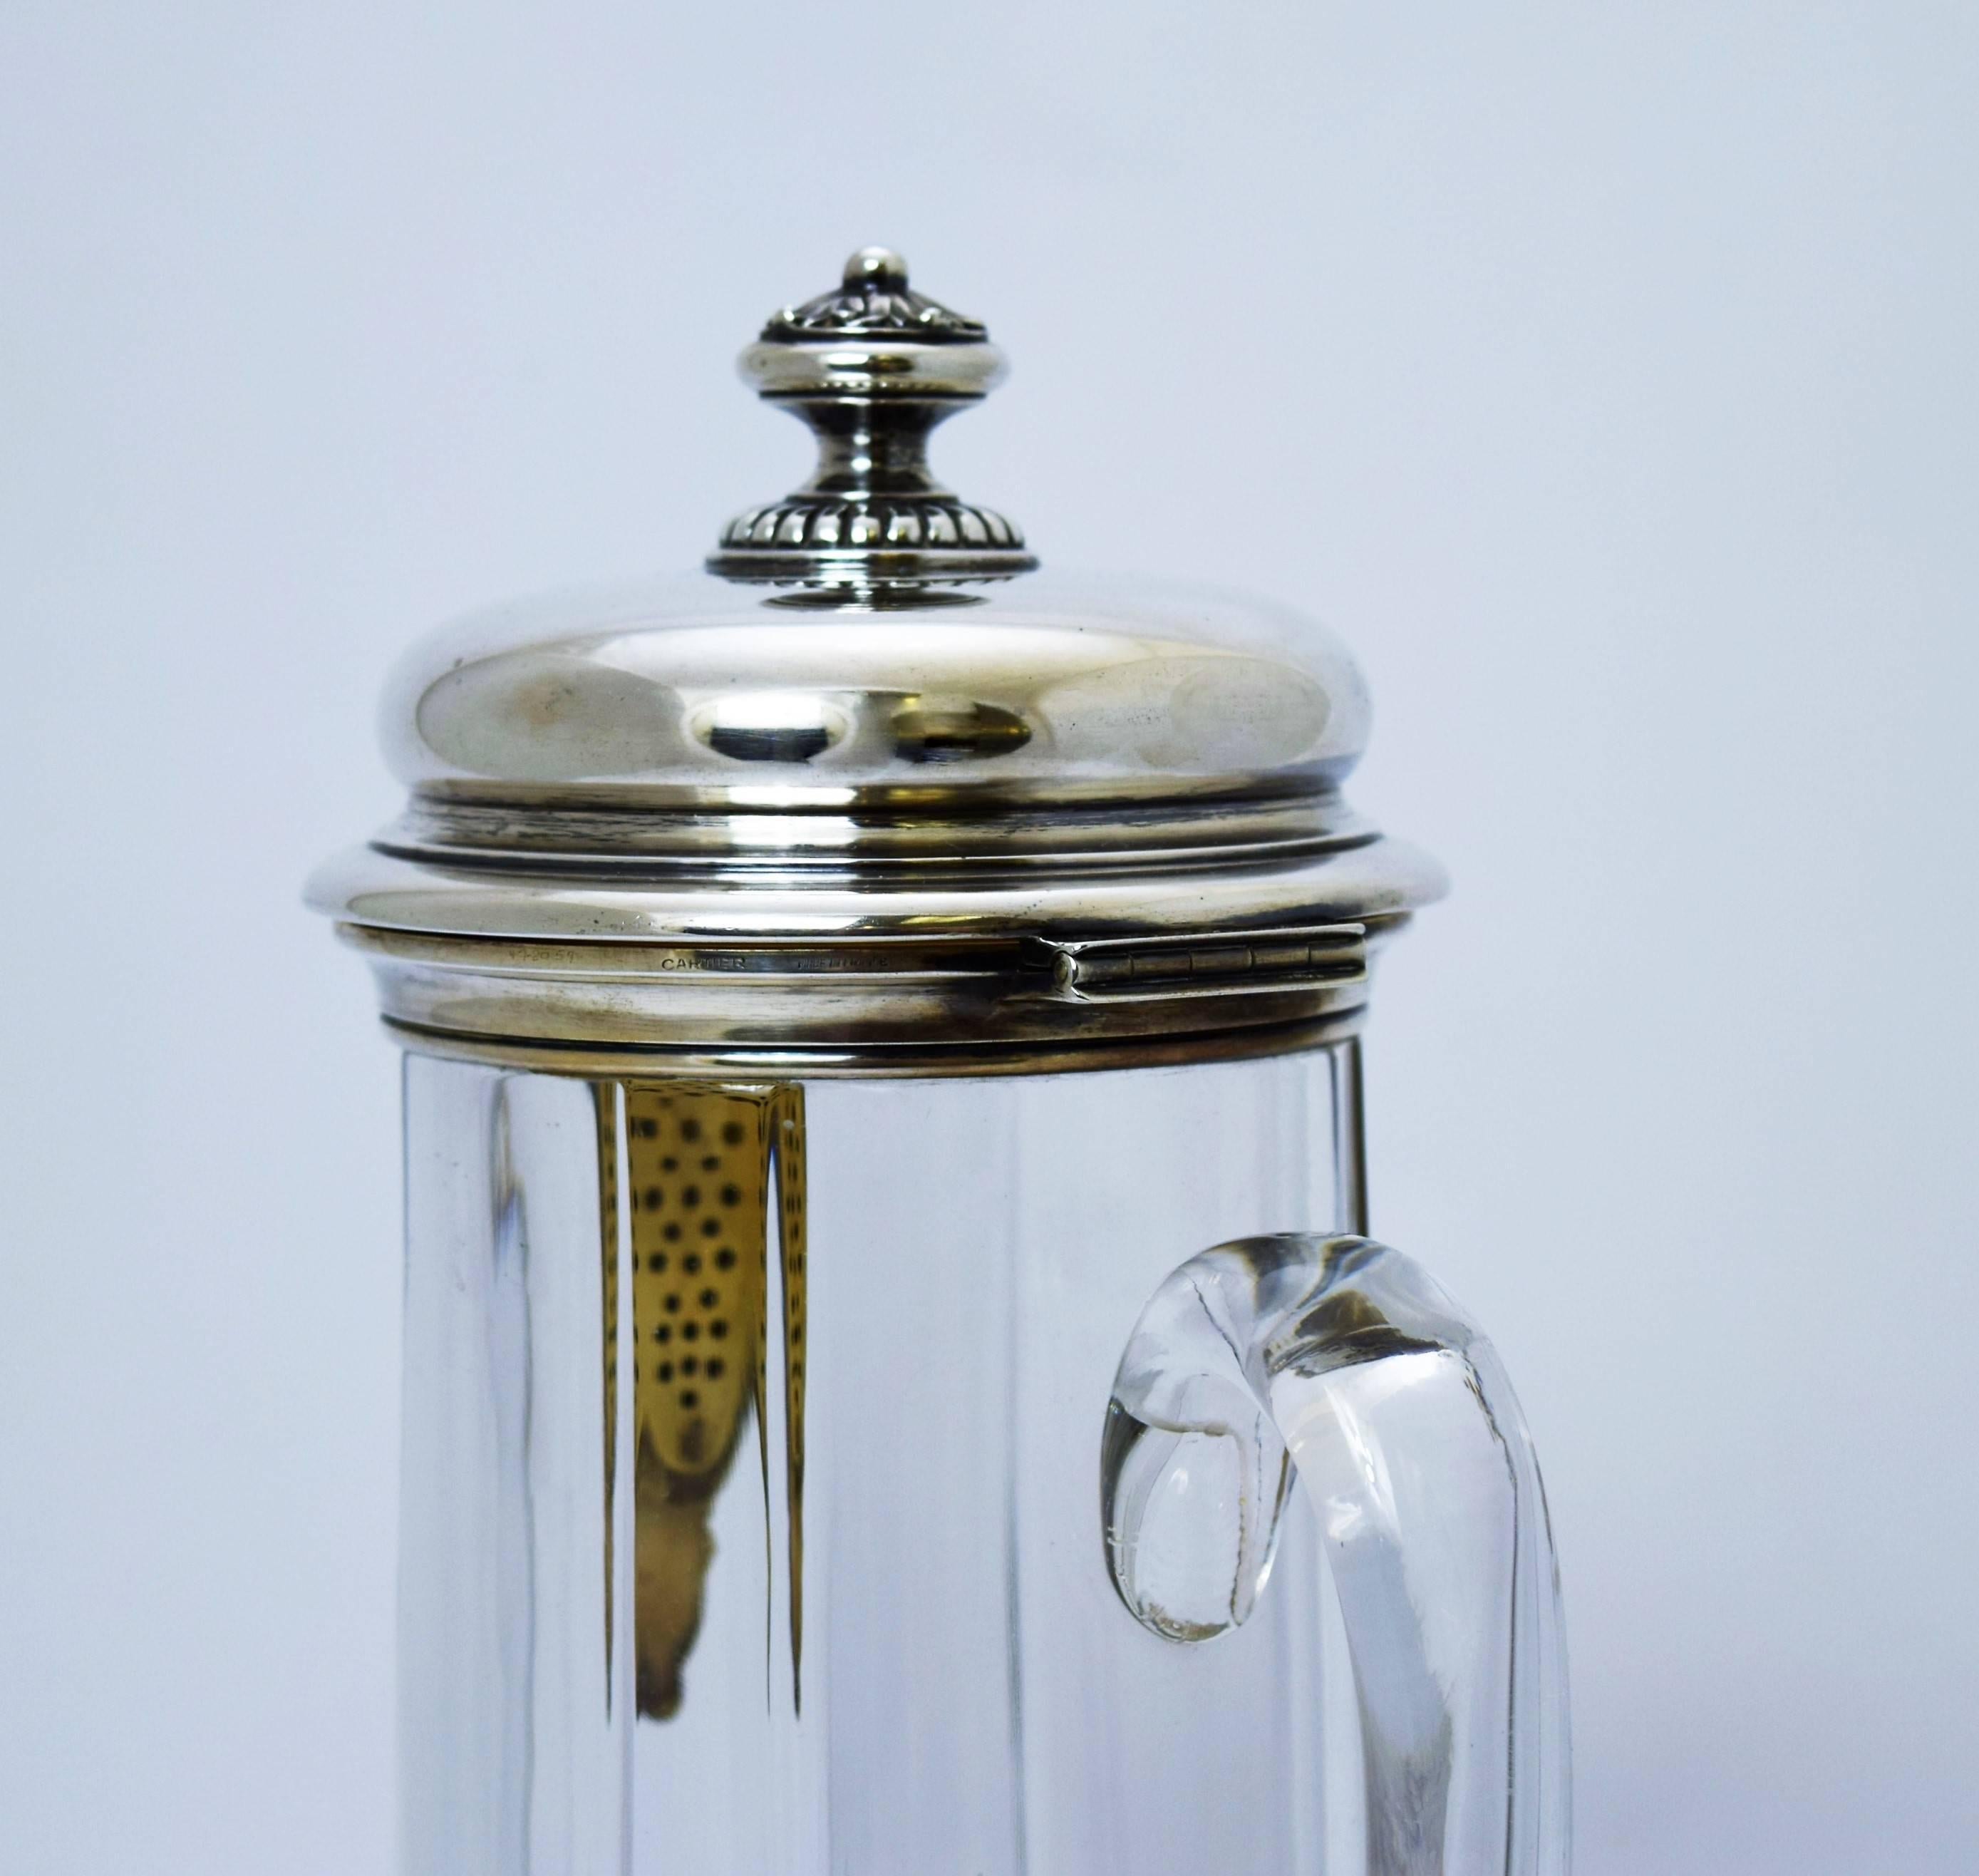 Offering a circa 1935 sterling silver and mounted glass claret jug by Cartier of France. Dimensions: 11 1/2 inches height. Marked as illustrated. In excellent condition.